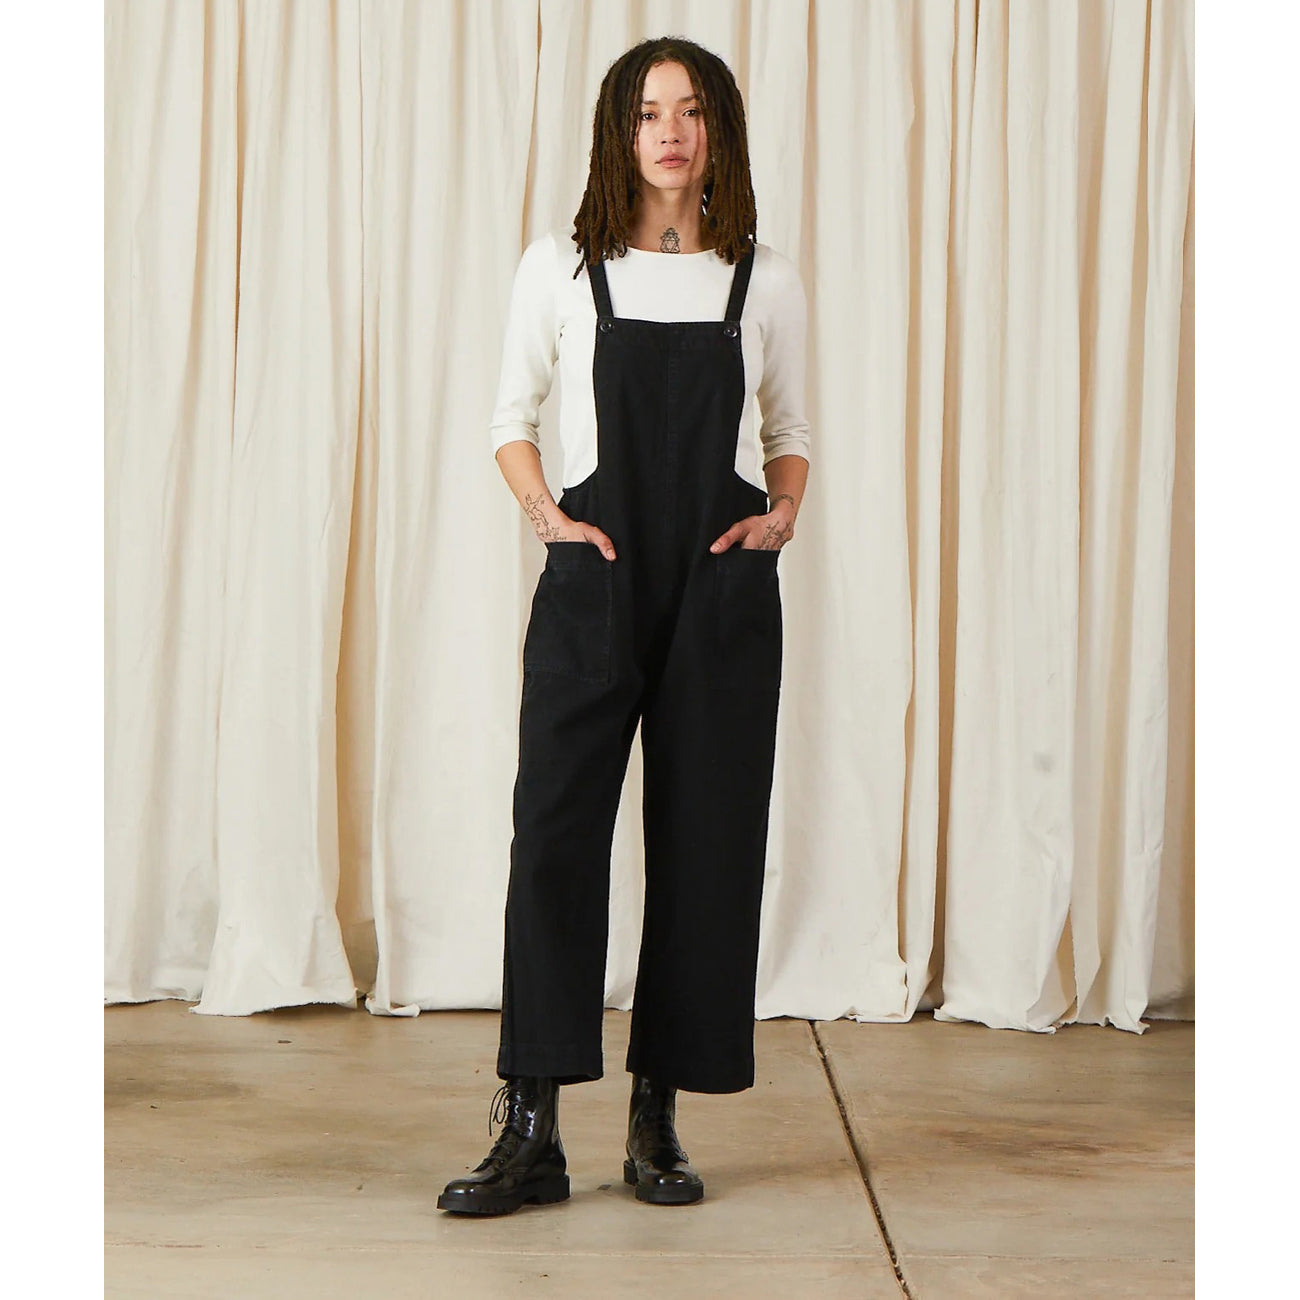 overall jumper in faded black